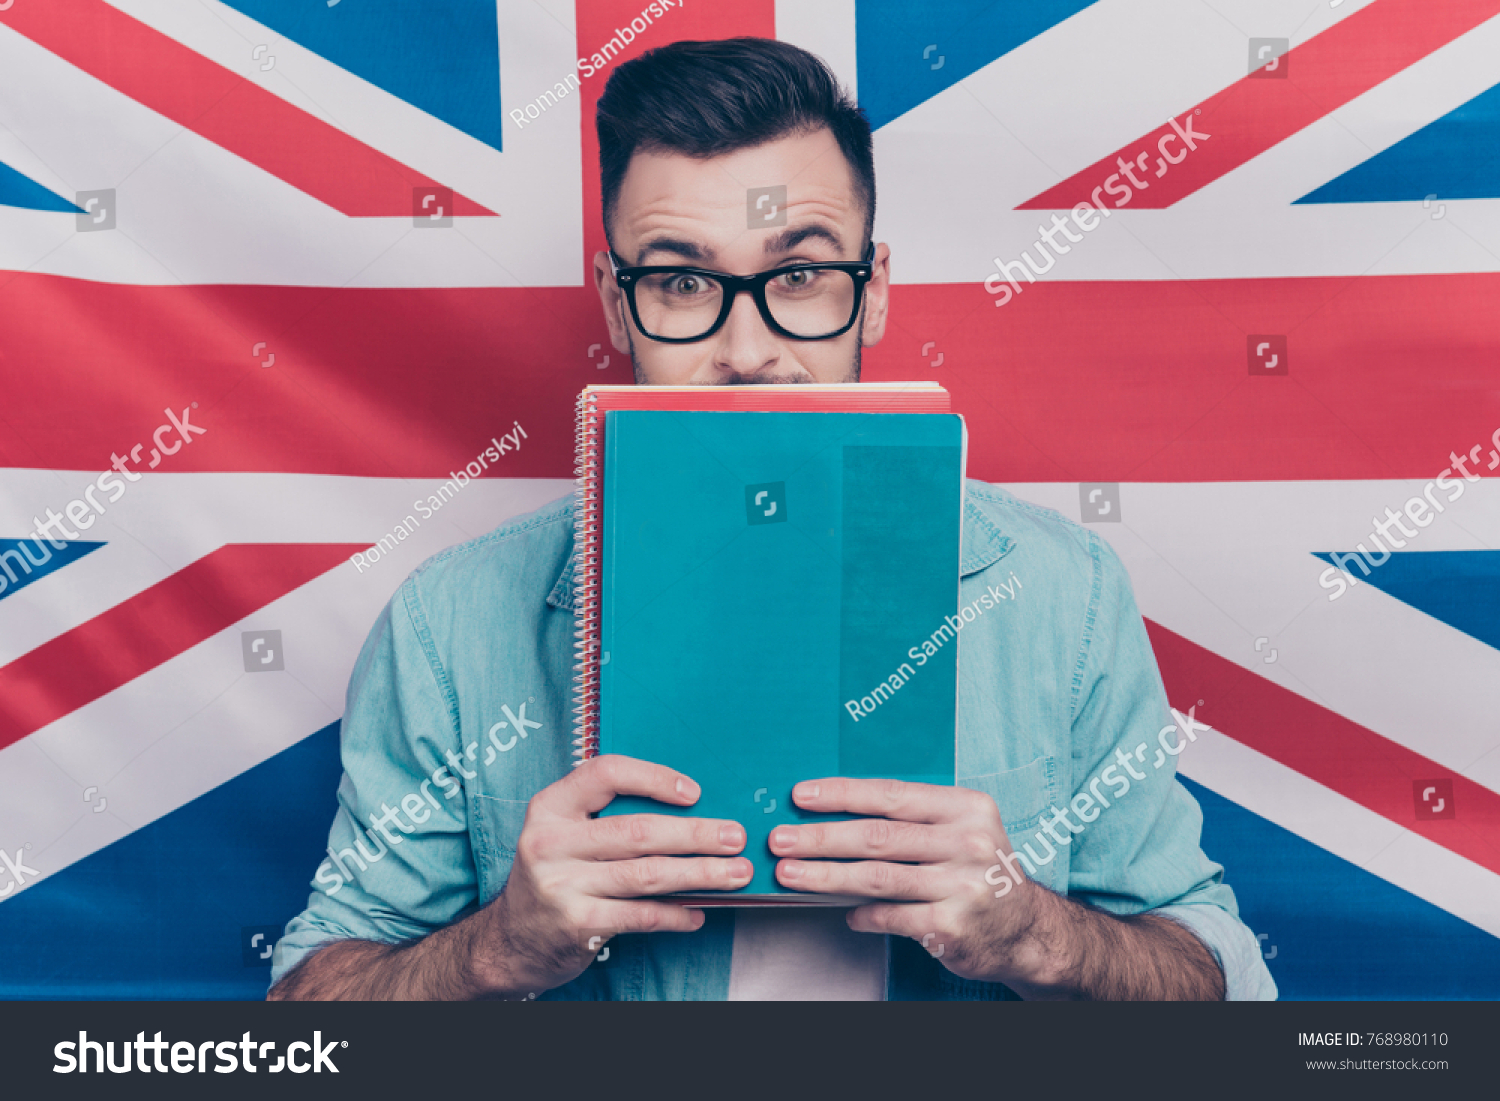 English language learning concept-portrait of excited man holding colorful copy books in hands closing half face with notebooks standing over English flag background #768980110